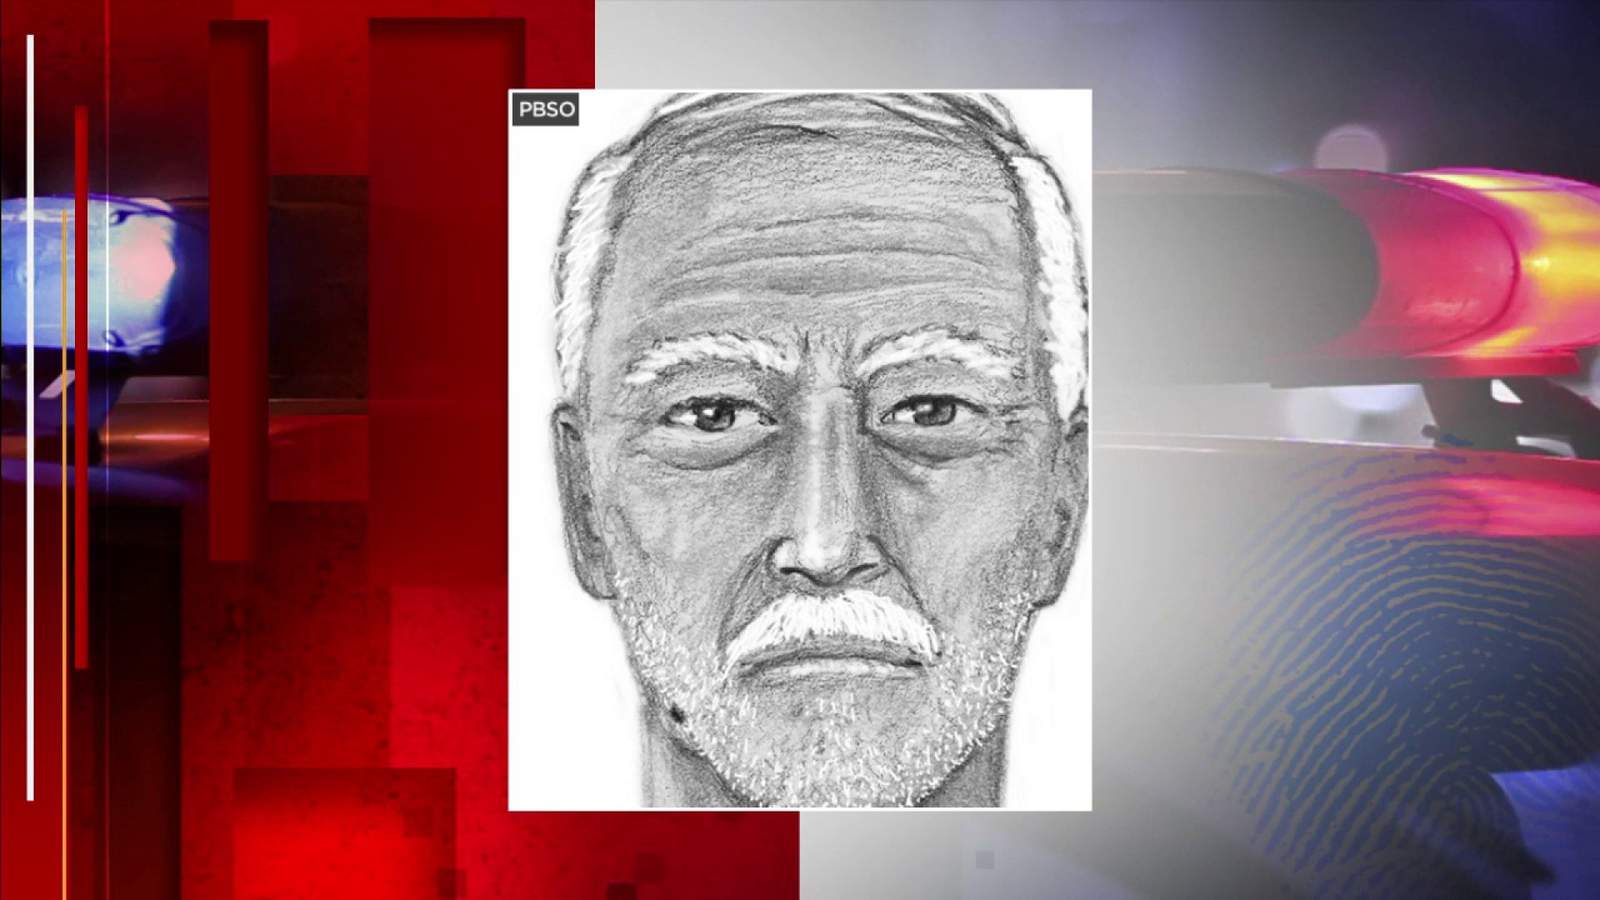 Authorities in Palm Beach County searching for man who allegedly assaulted 12-year-old girl